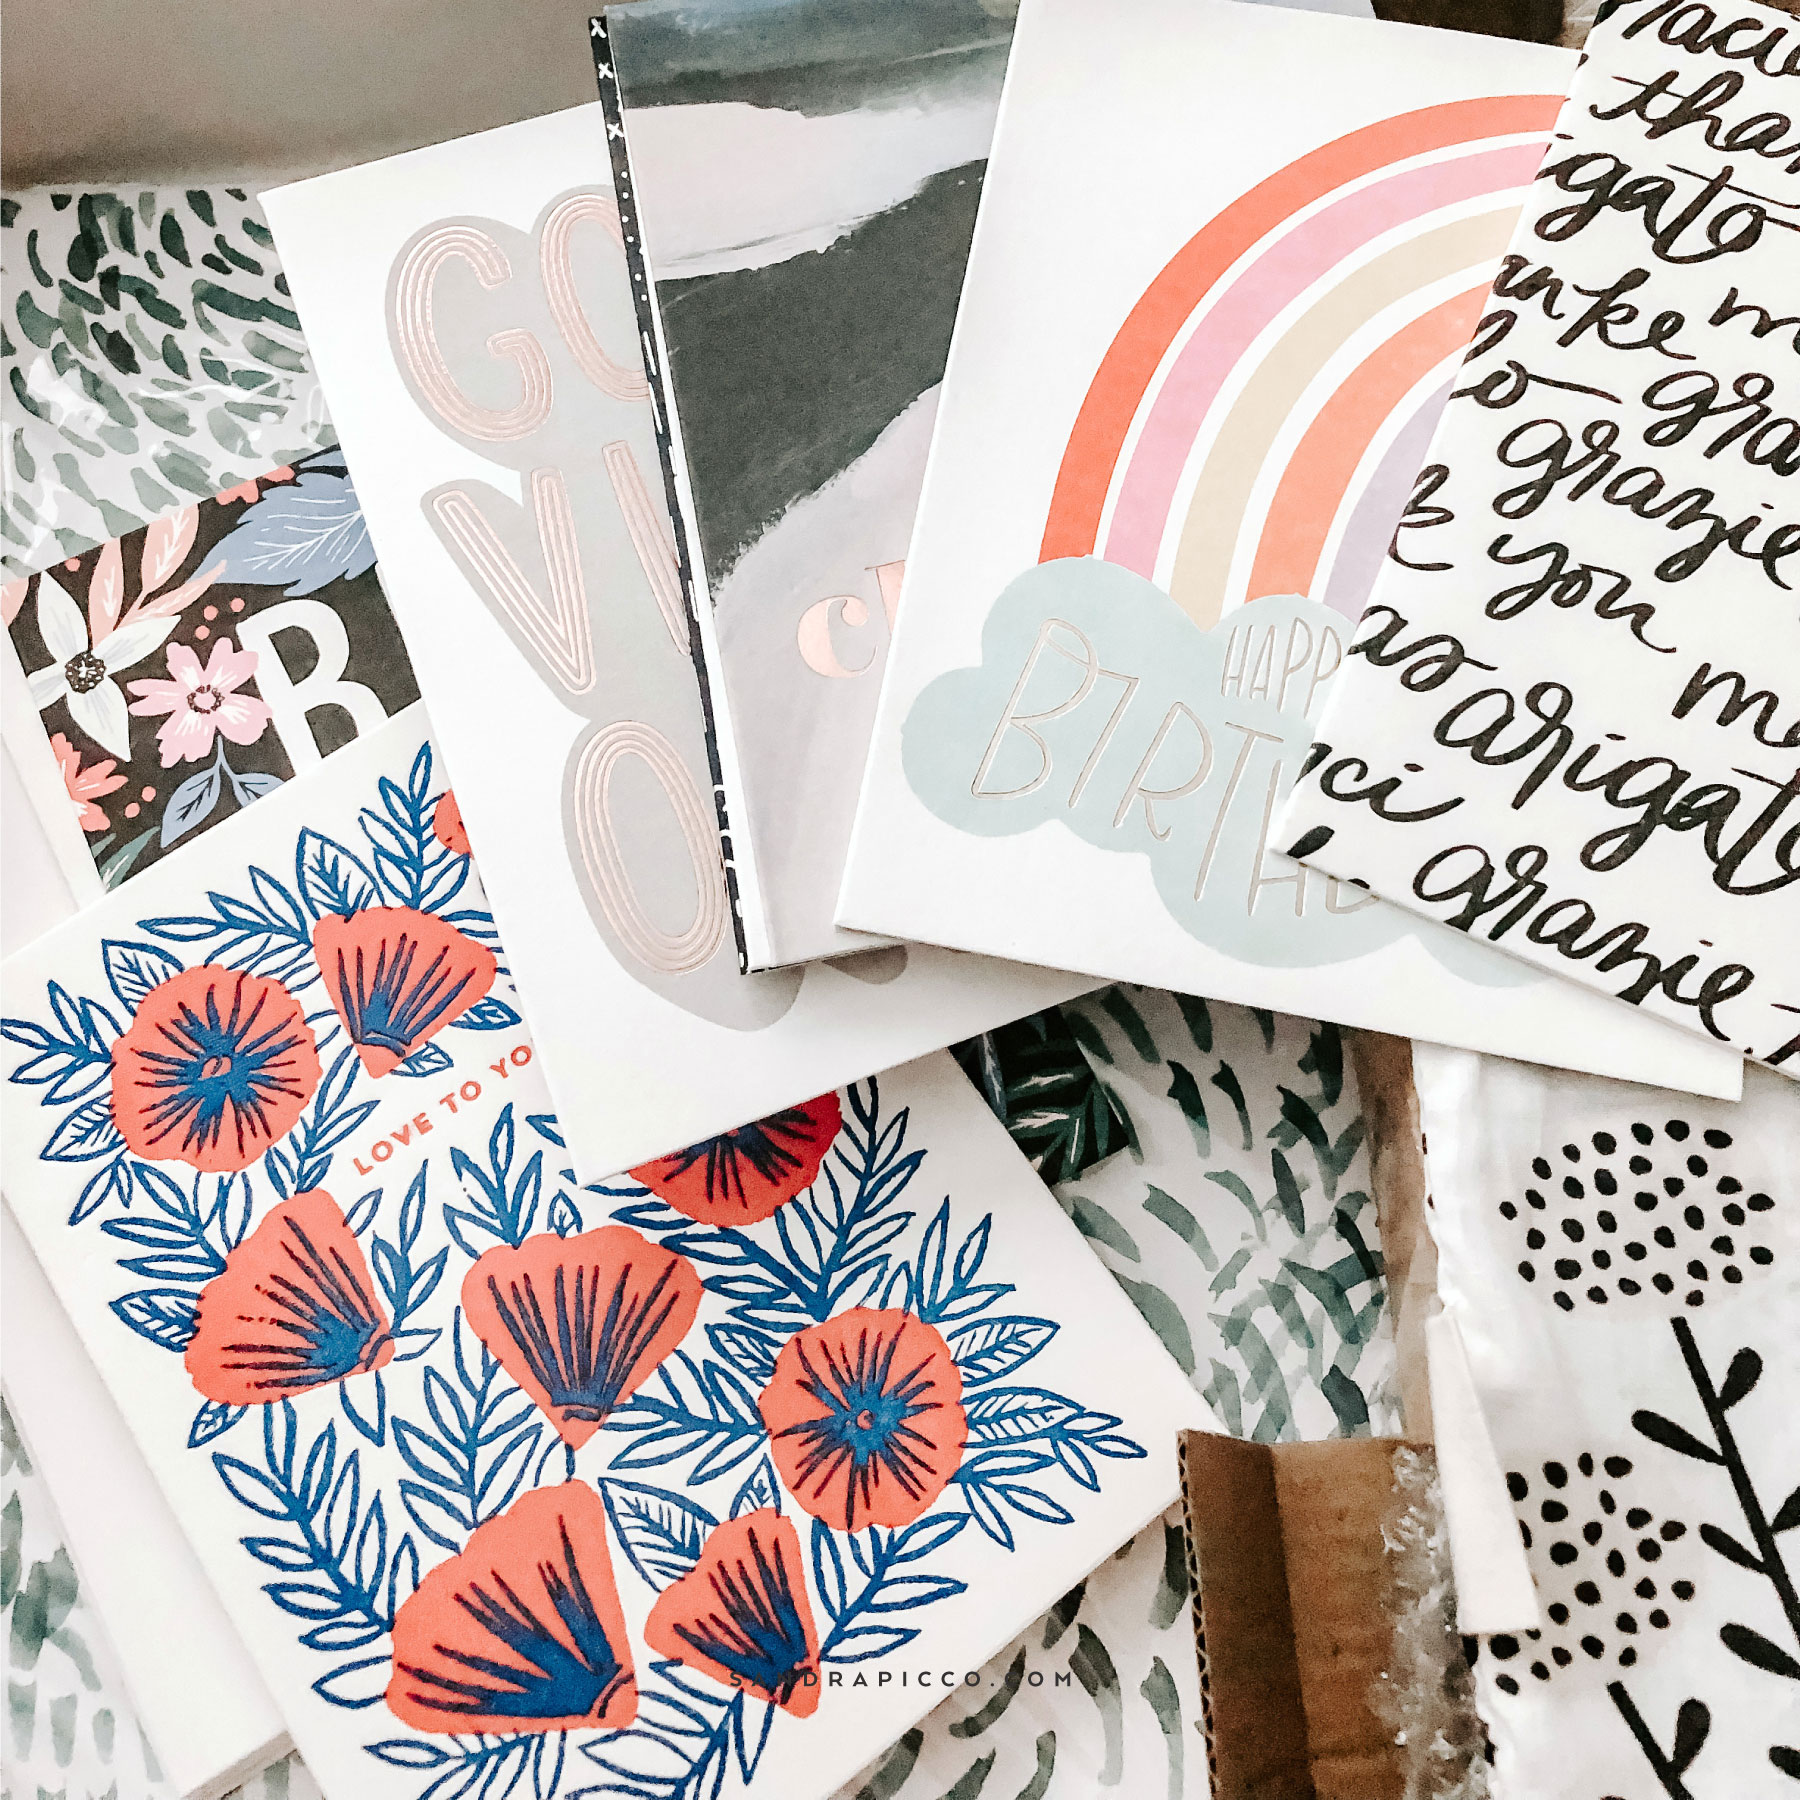 Birthday Cards from the Minted More membership box, plus a holiday discount